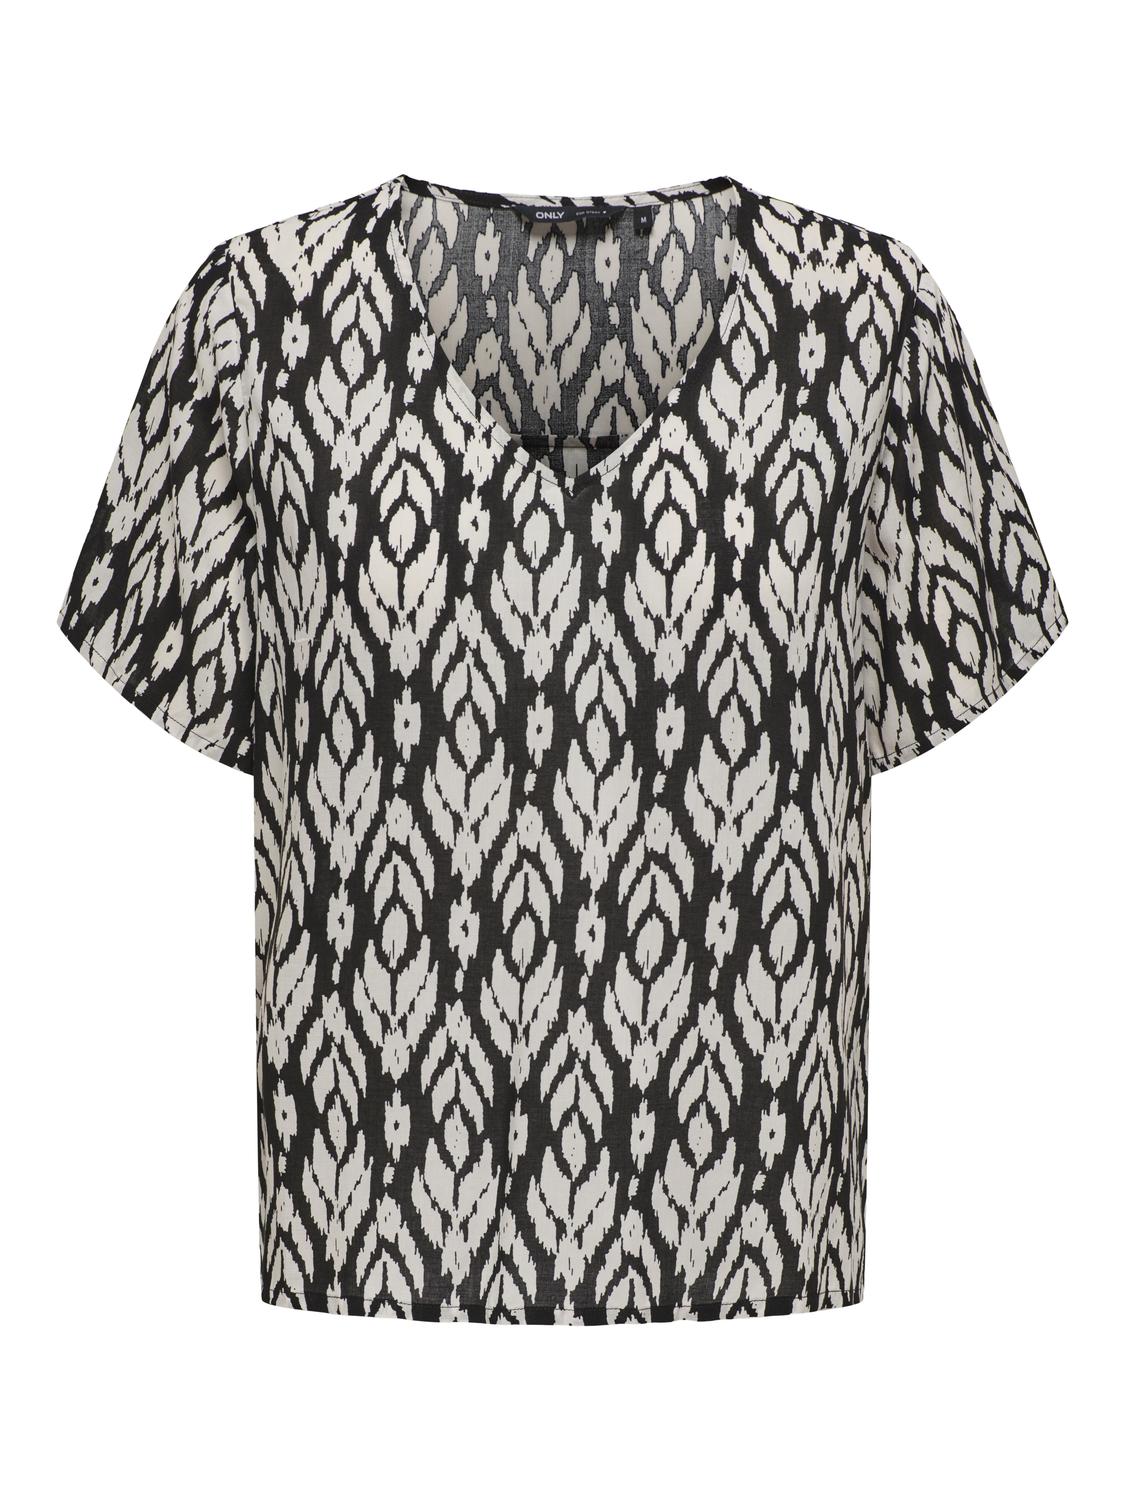 ONLY Loose fitted printet top -Black - 15325014